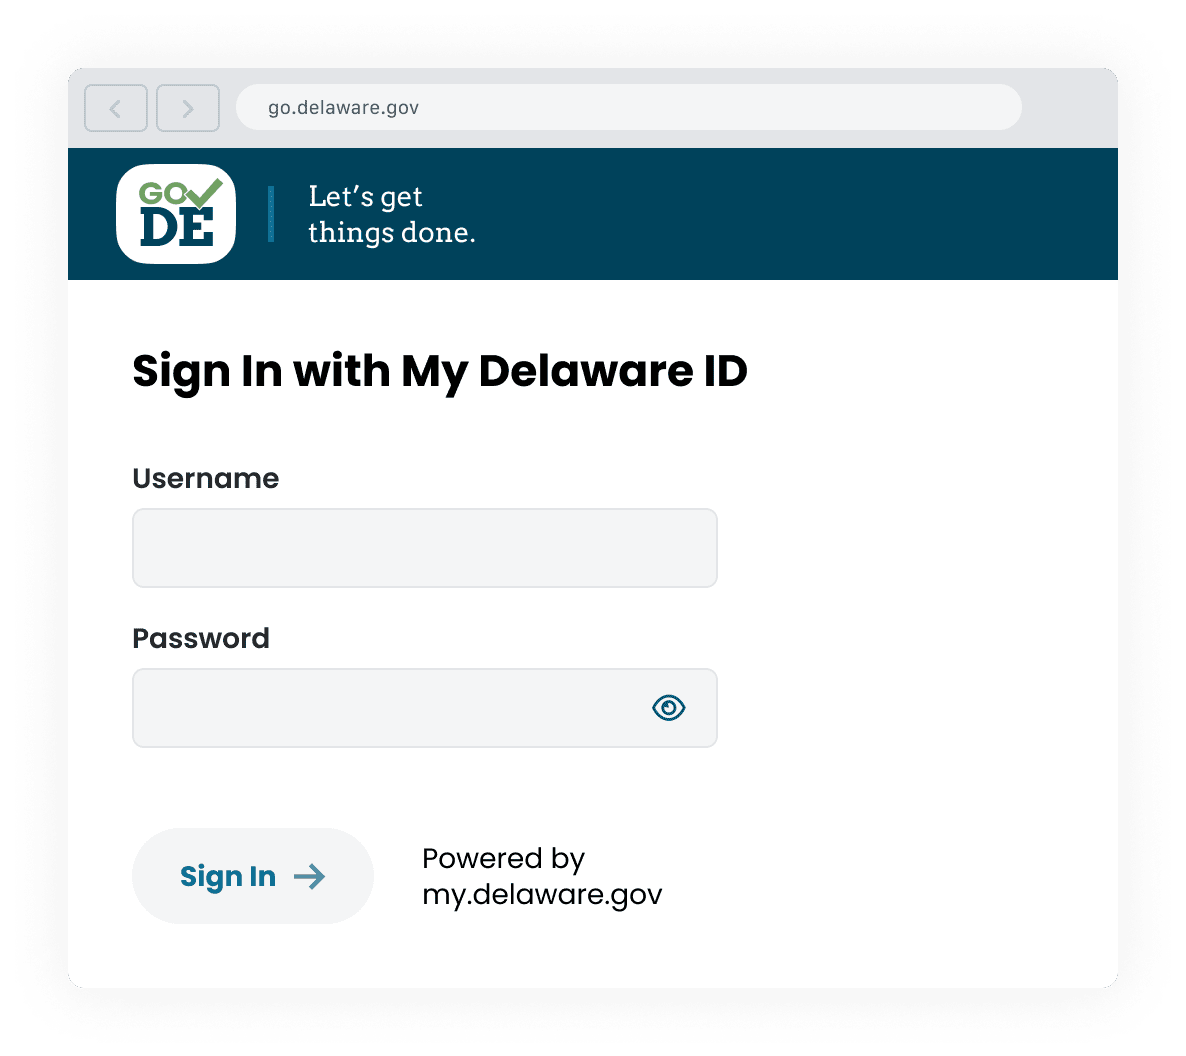 The Go DE screen that allows you to sign in with your Delaware ID. It includes username and password fields.